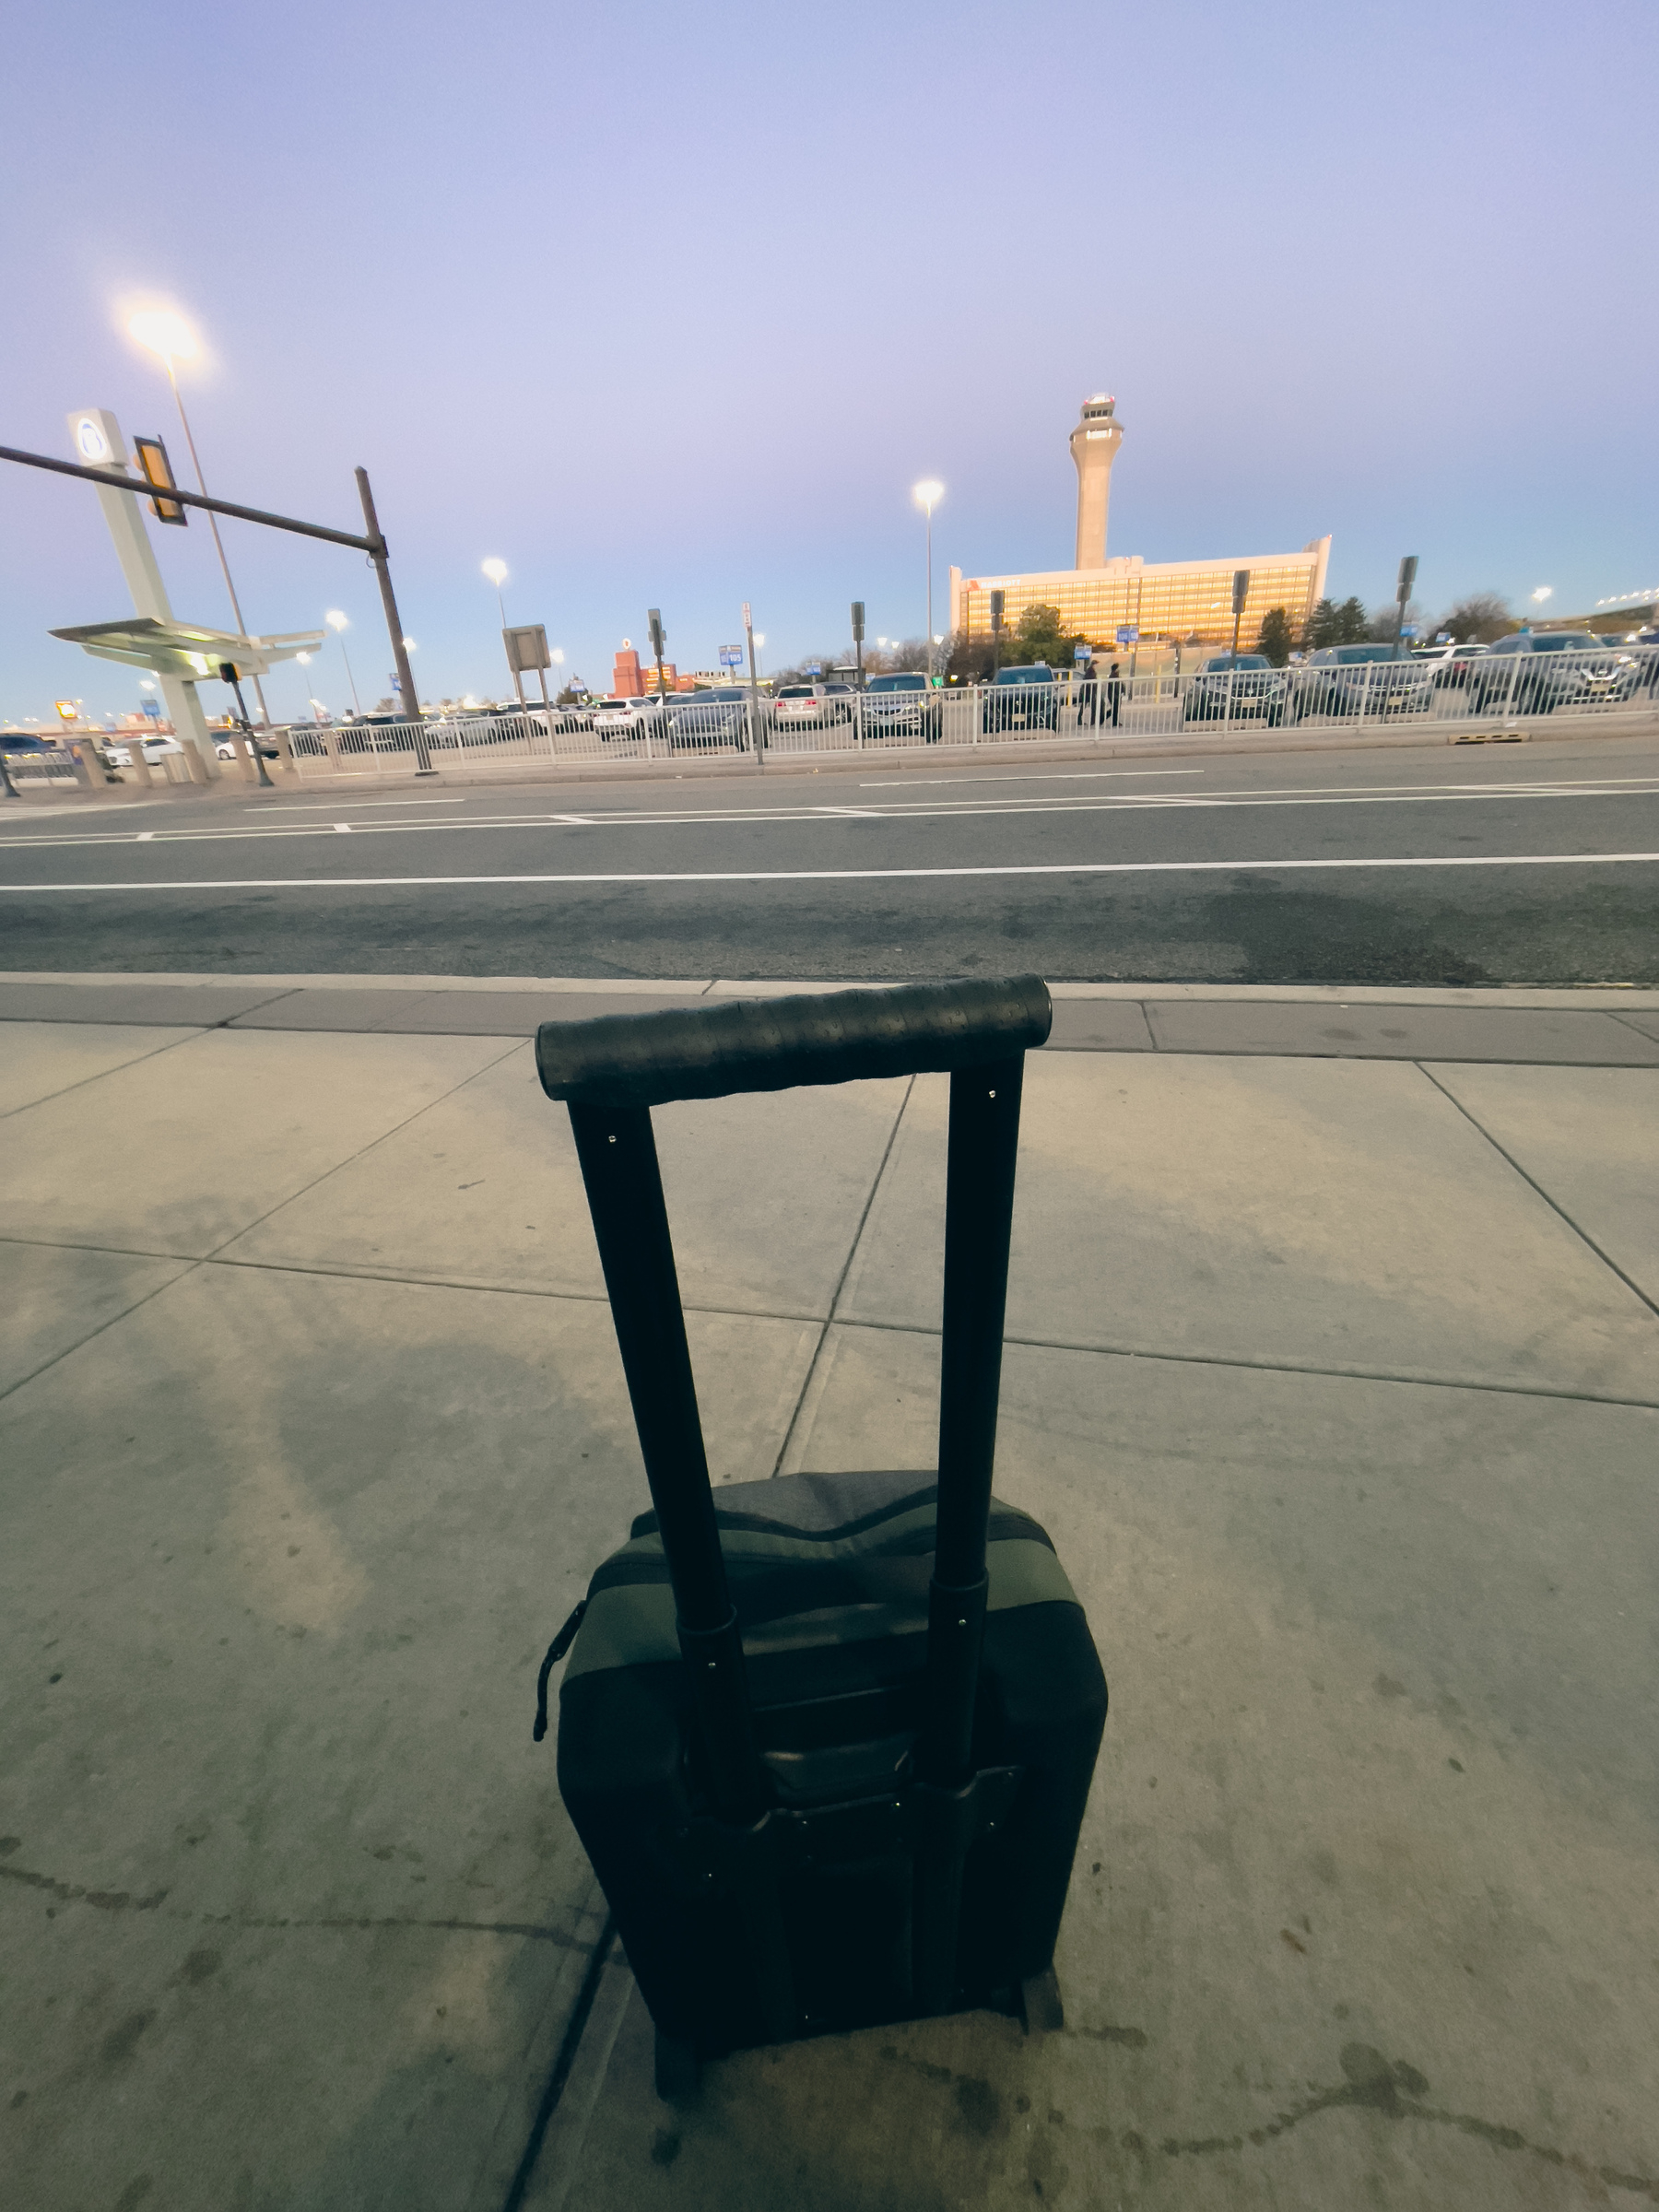 Carry on type suitcase with handle and wheels in foreground, parking lot and control tower building in background.